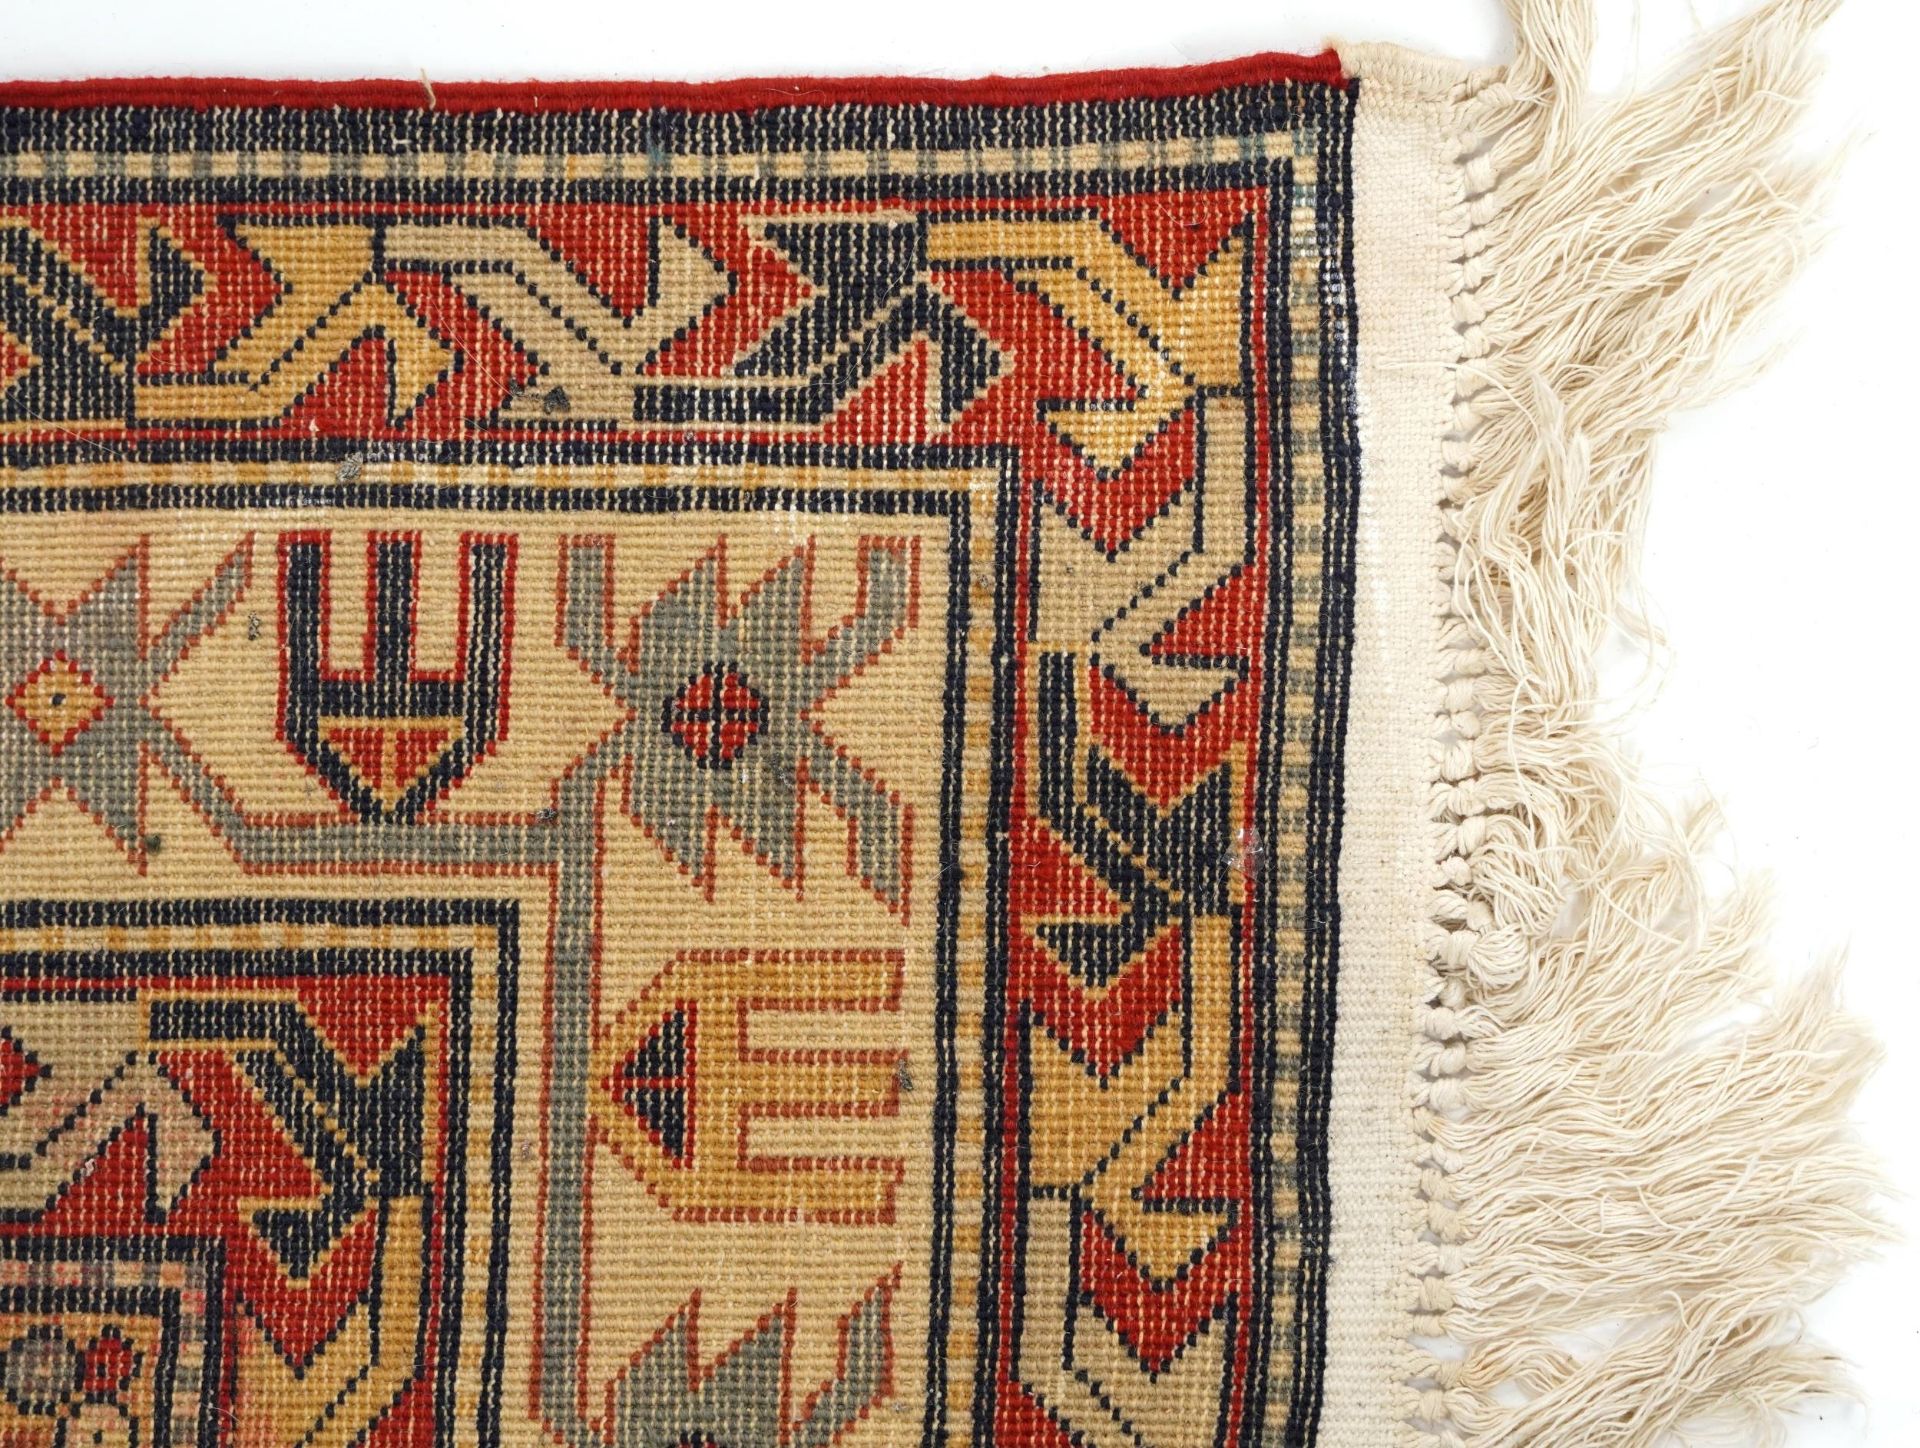 Rectangular Middle Eastern red and blue ground rug having an all over geometric design, 200cm x - Image 6 of 6